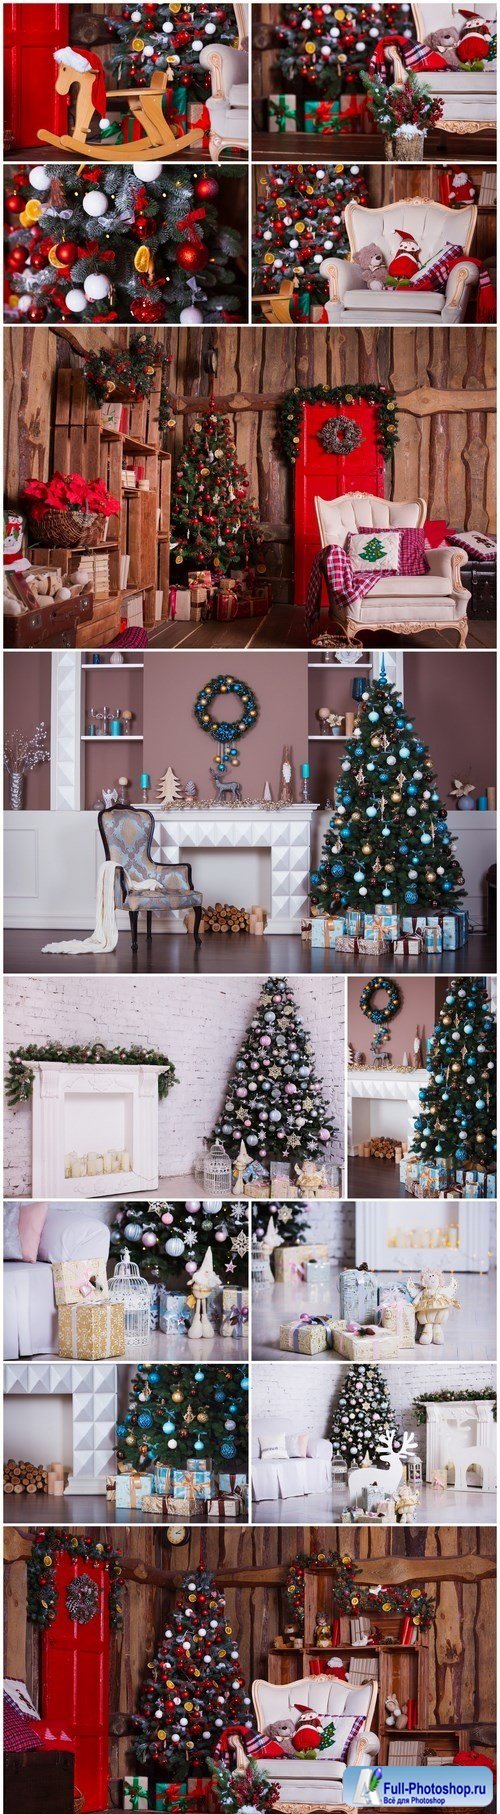 Interior room decorated in Christmas style - 13xUHQ JPEG